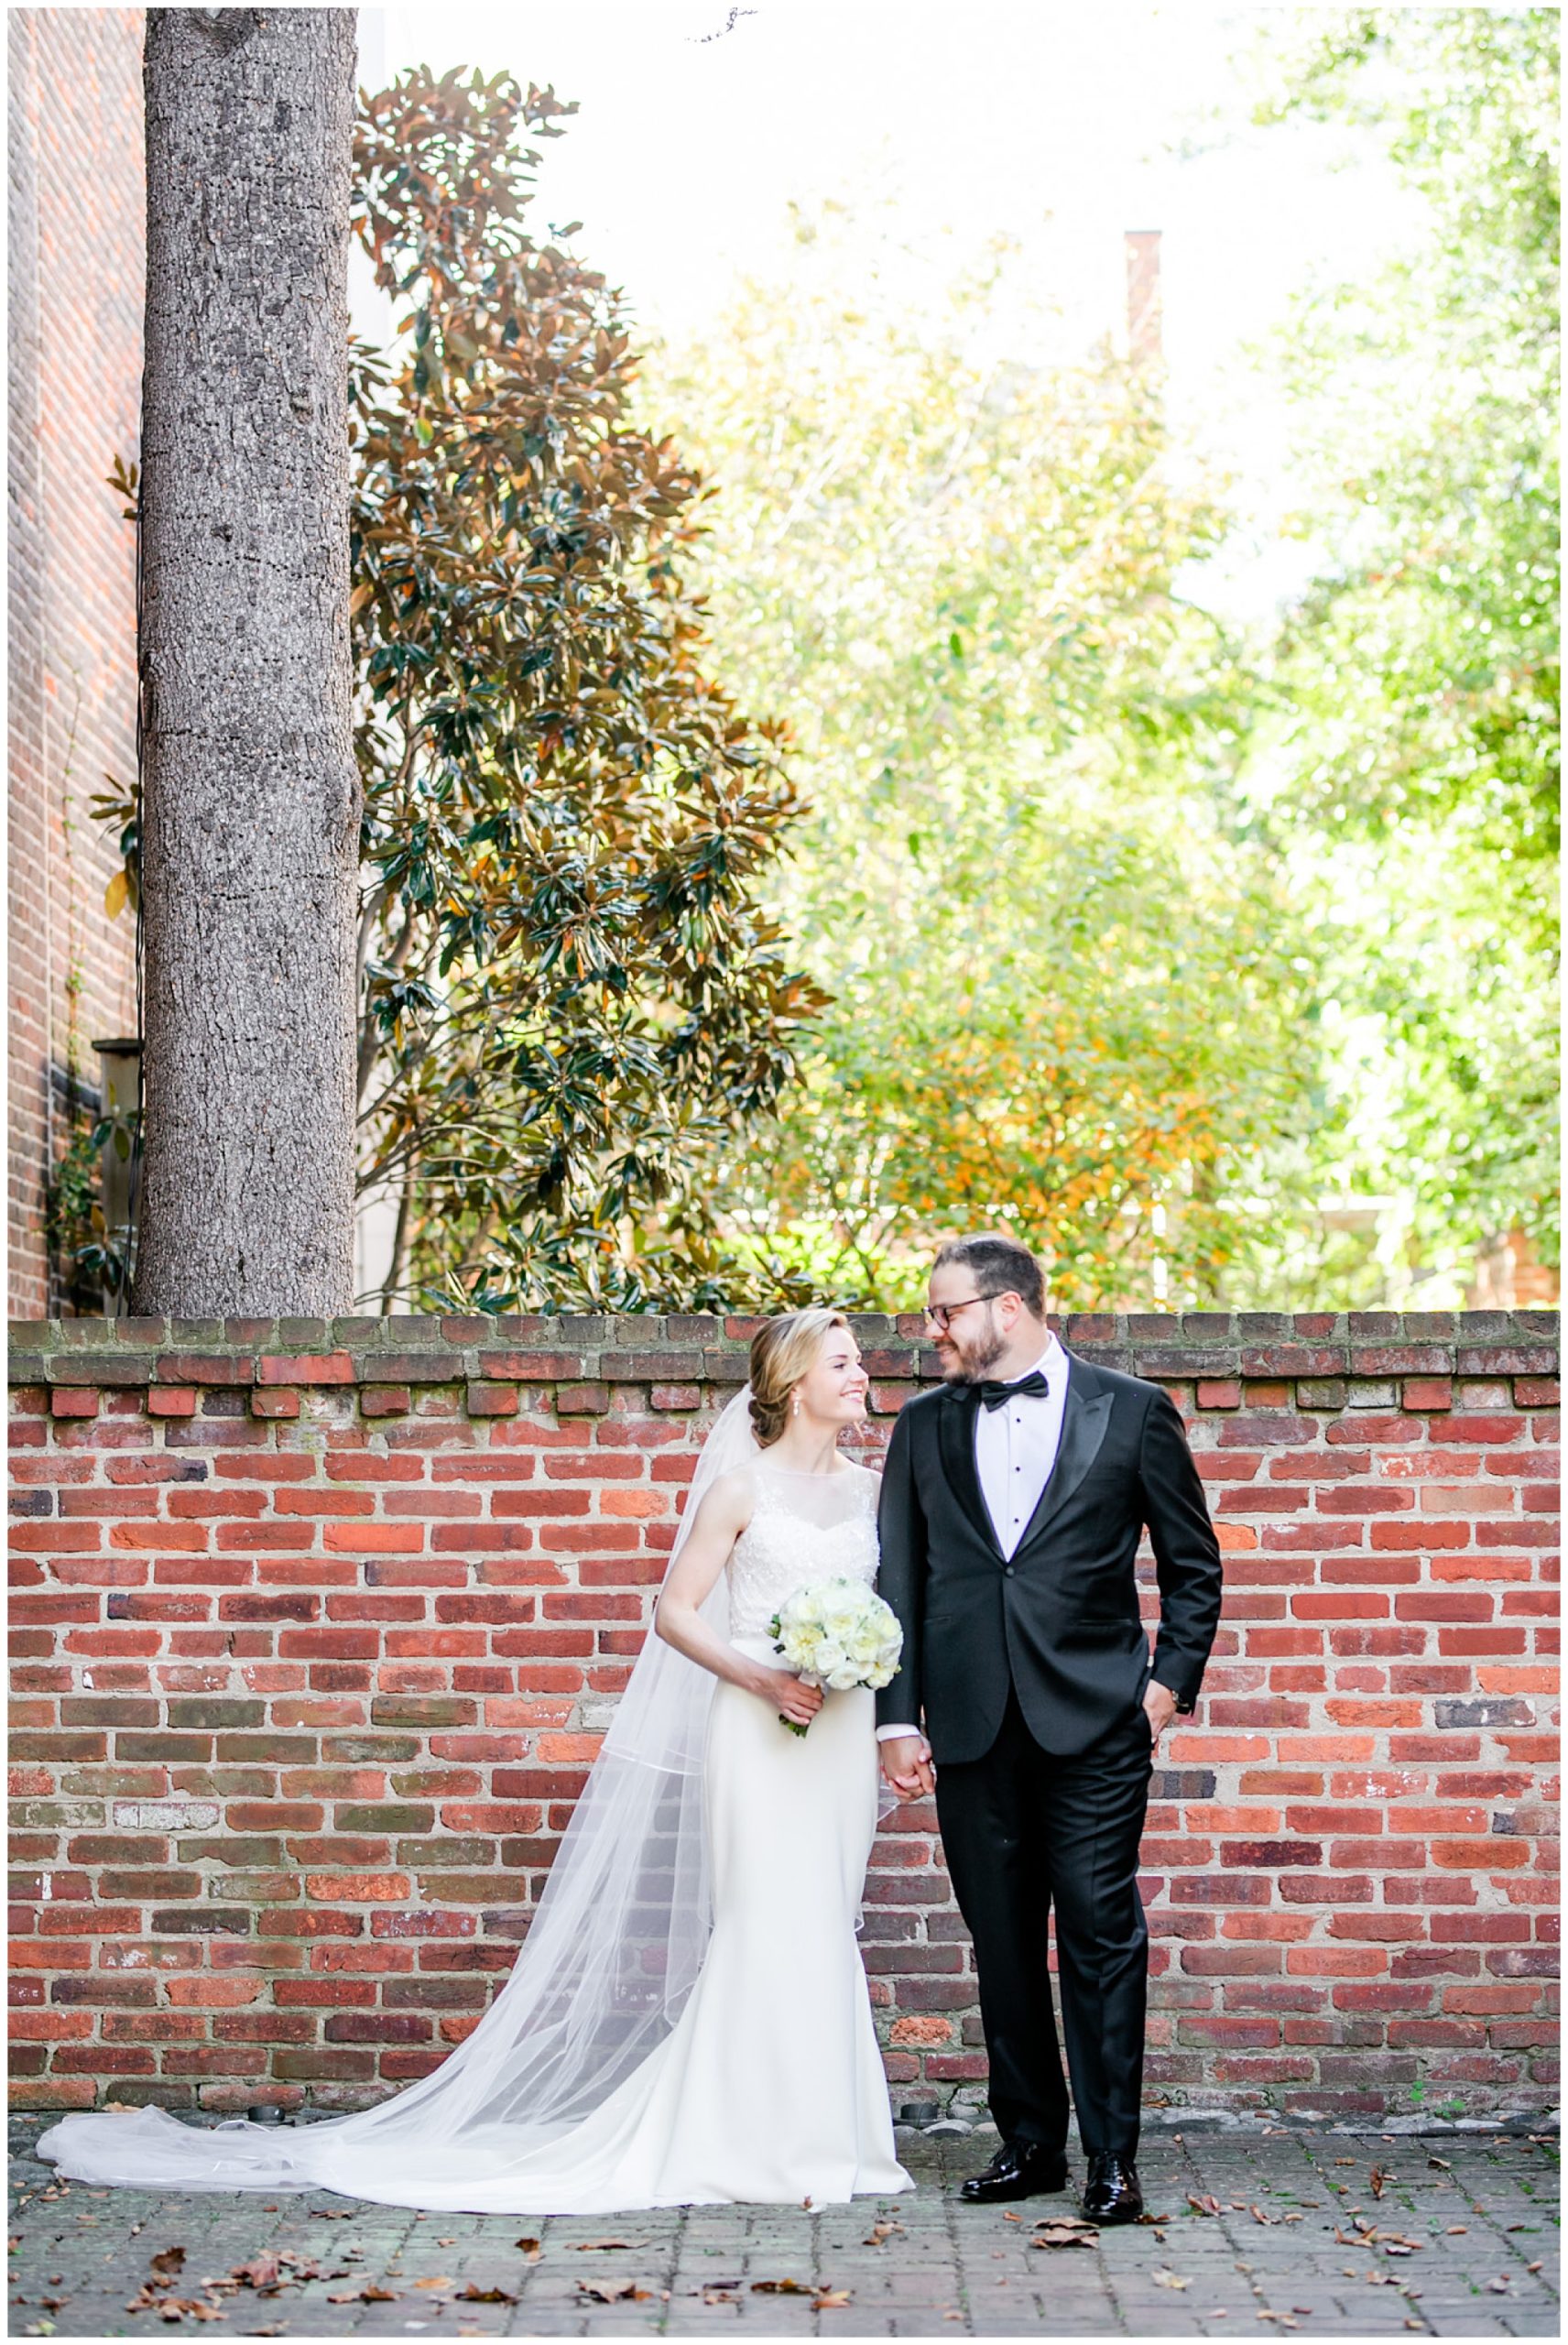 autumn Old Town Alexandria wedding, Old Town photographer, Alexandria wedding photographer, Northern Virginia wedding photographer, DC wedding photographer, Rachel E.H. Photography, autumn wedding, early autumn wedding, warm weather wedding, white aesthetic, classic wedding aesthetic, classic bride and groom, magic hour portraits, newlywed portraits